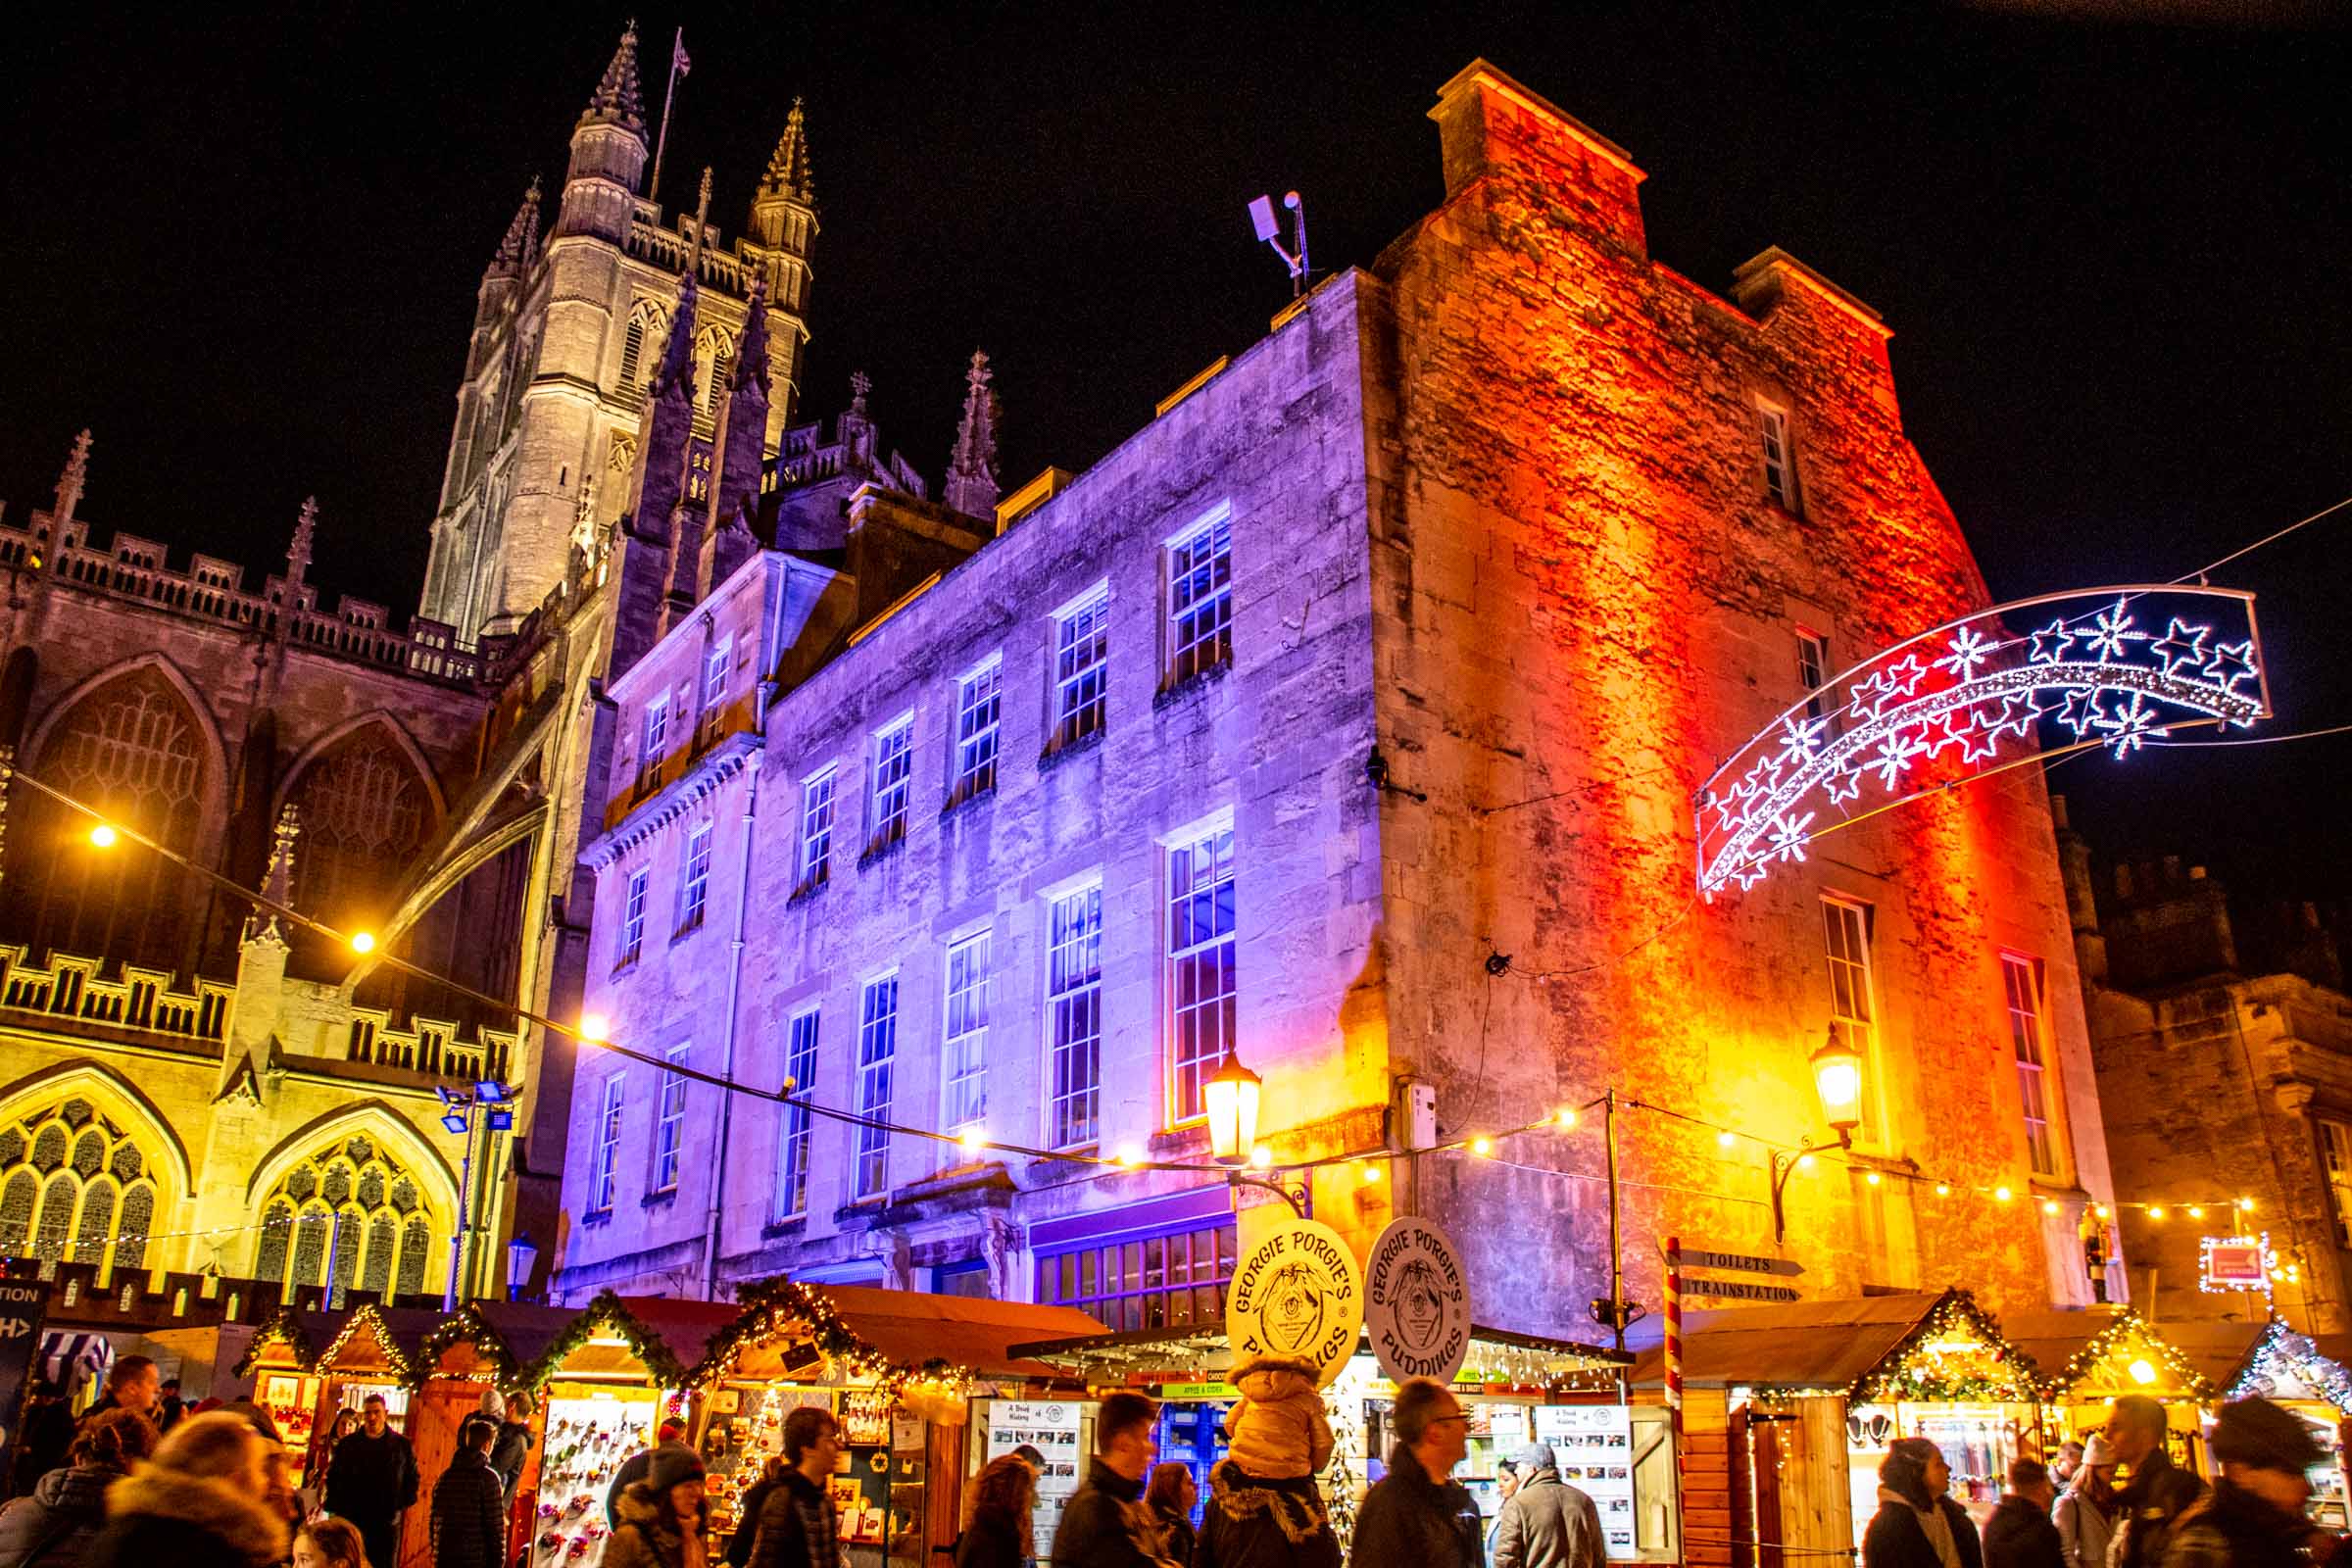 People shopping at night by Bath Abbey, lit up in purple and red lights